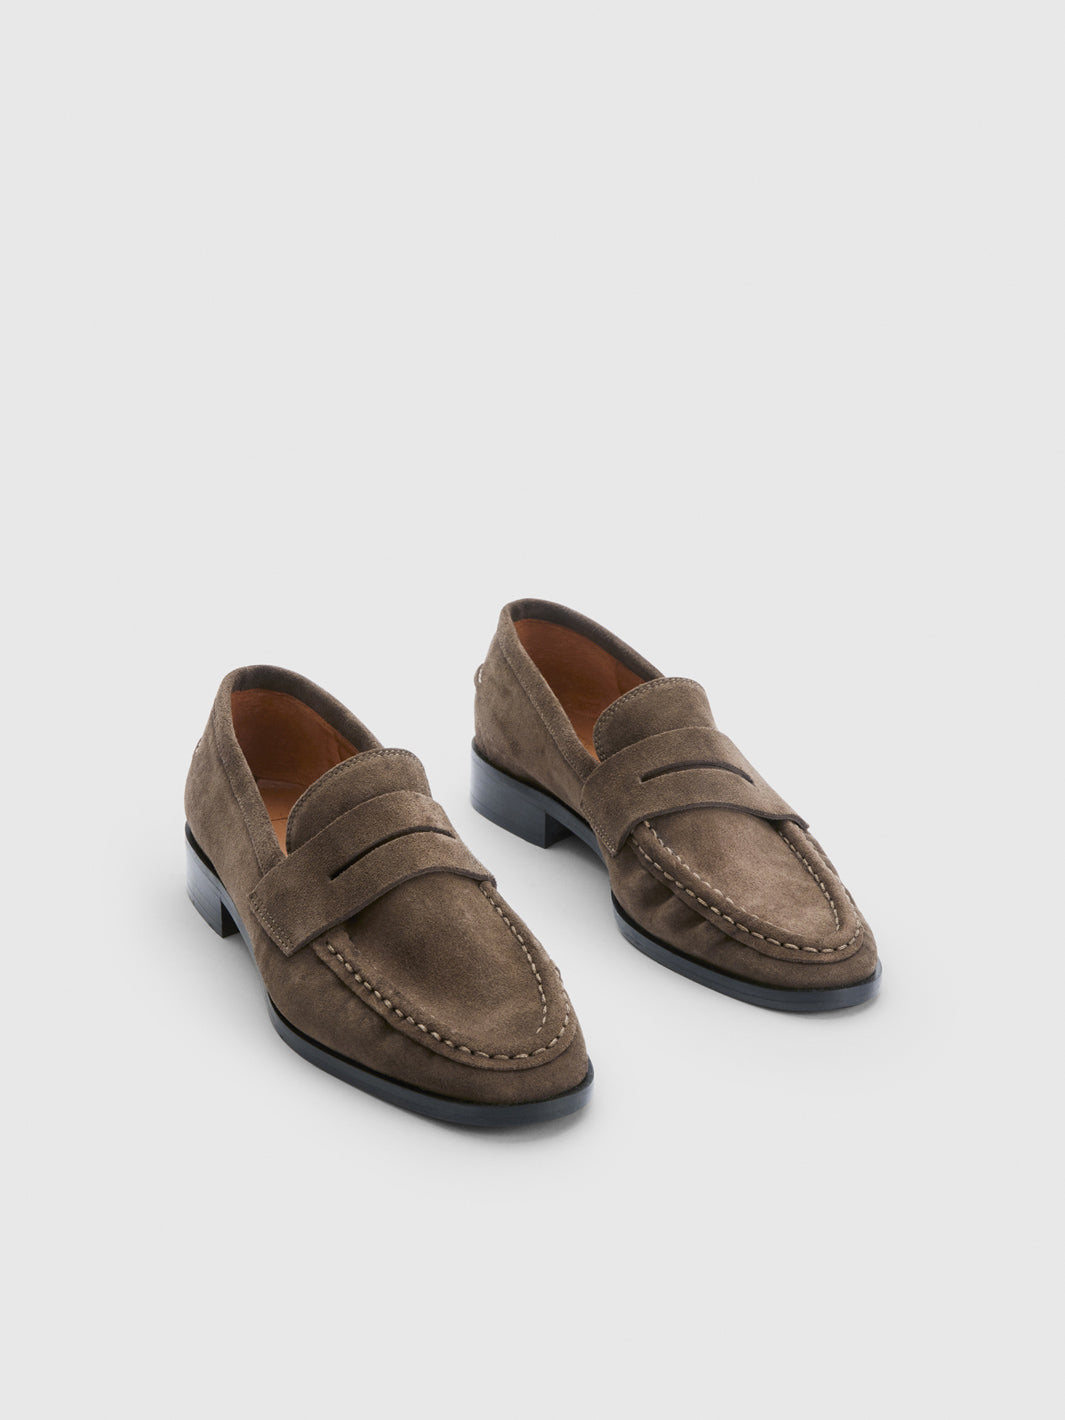 Airola Khaki Brown Suede Loafers